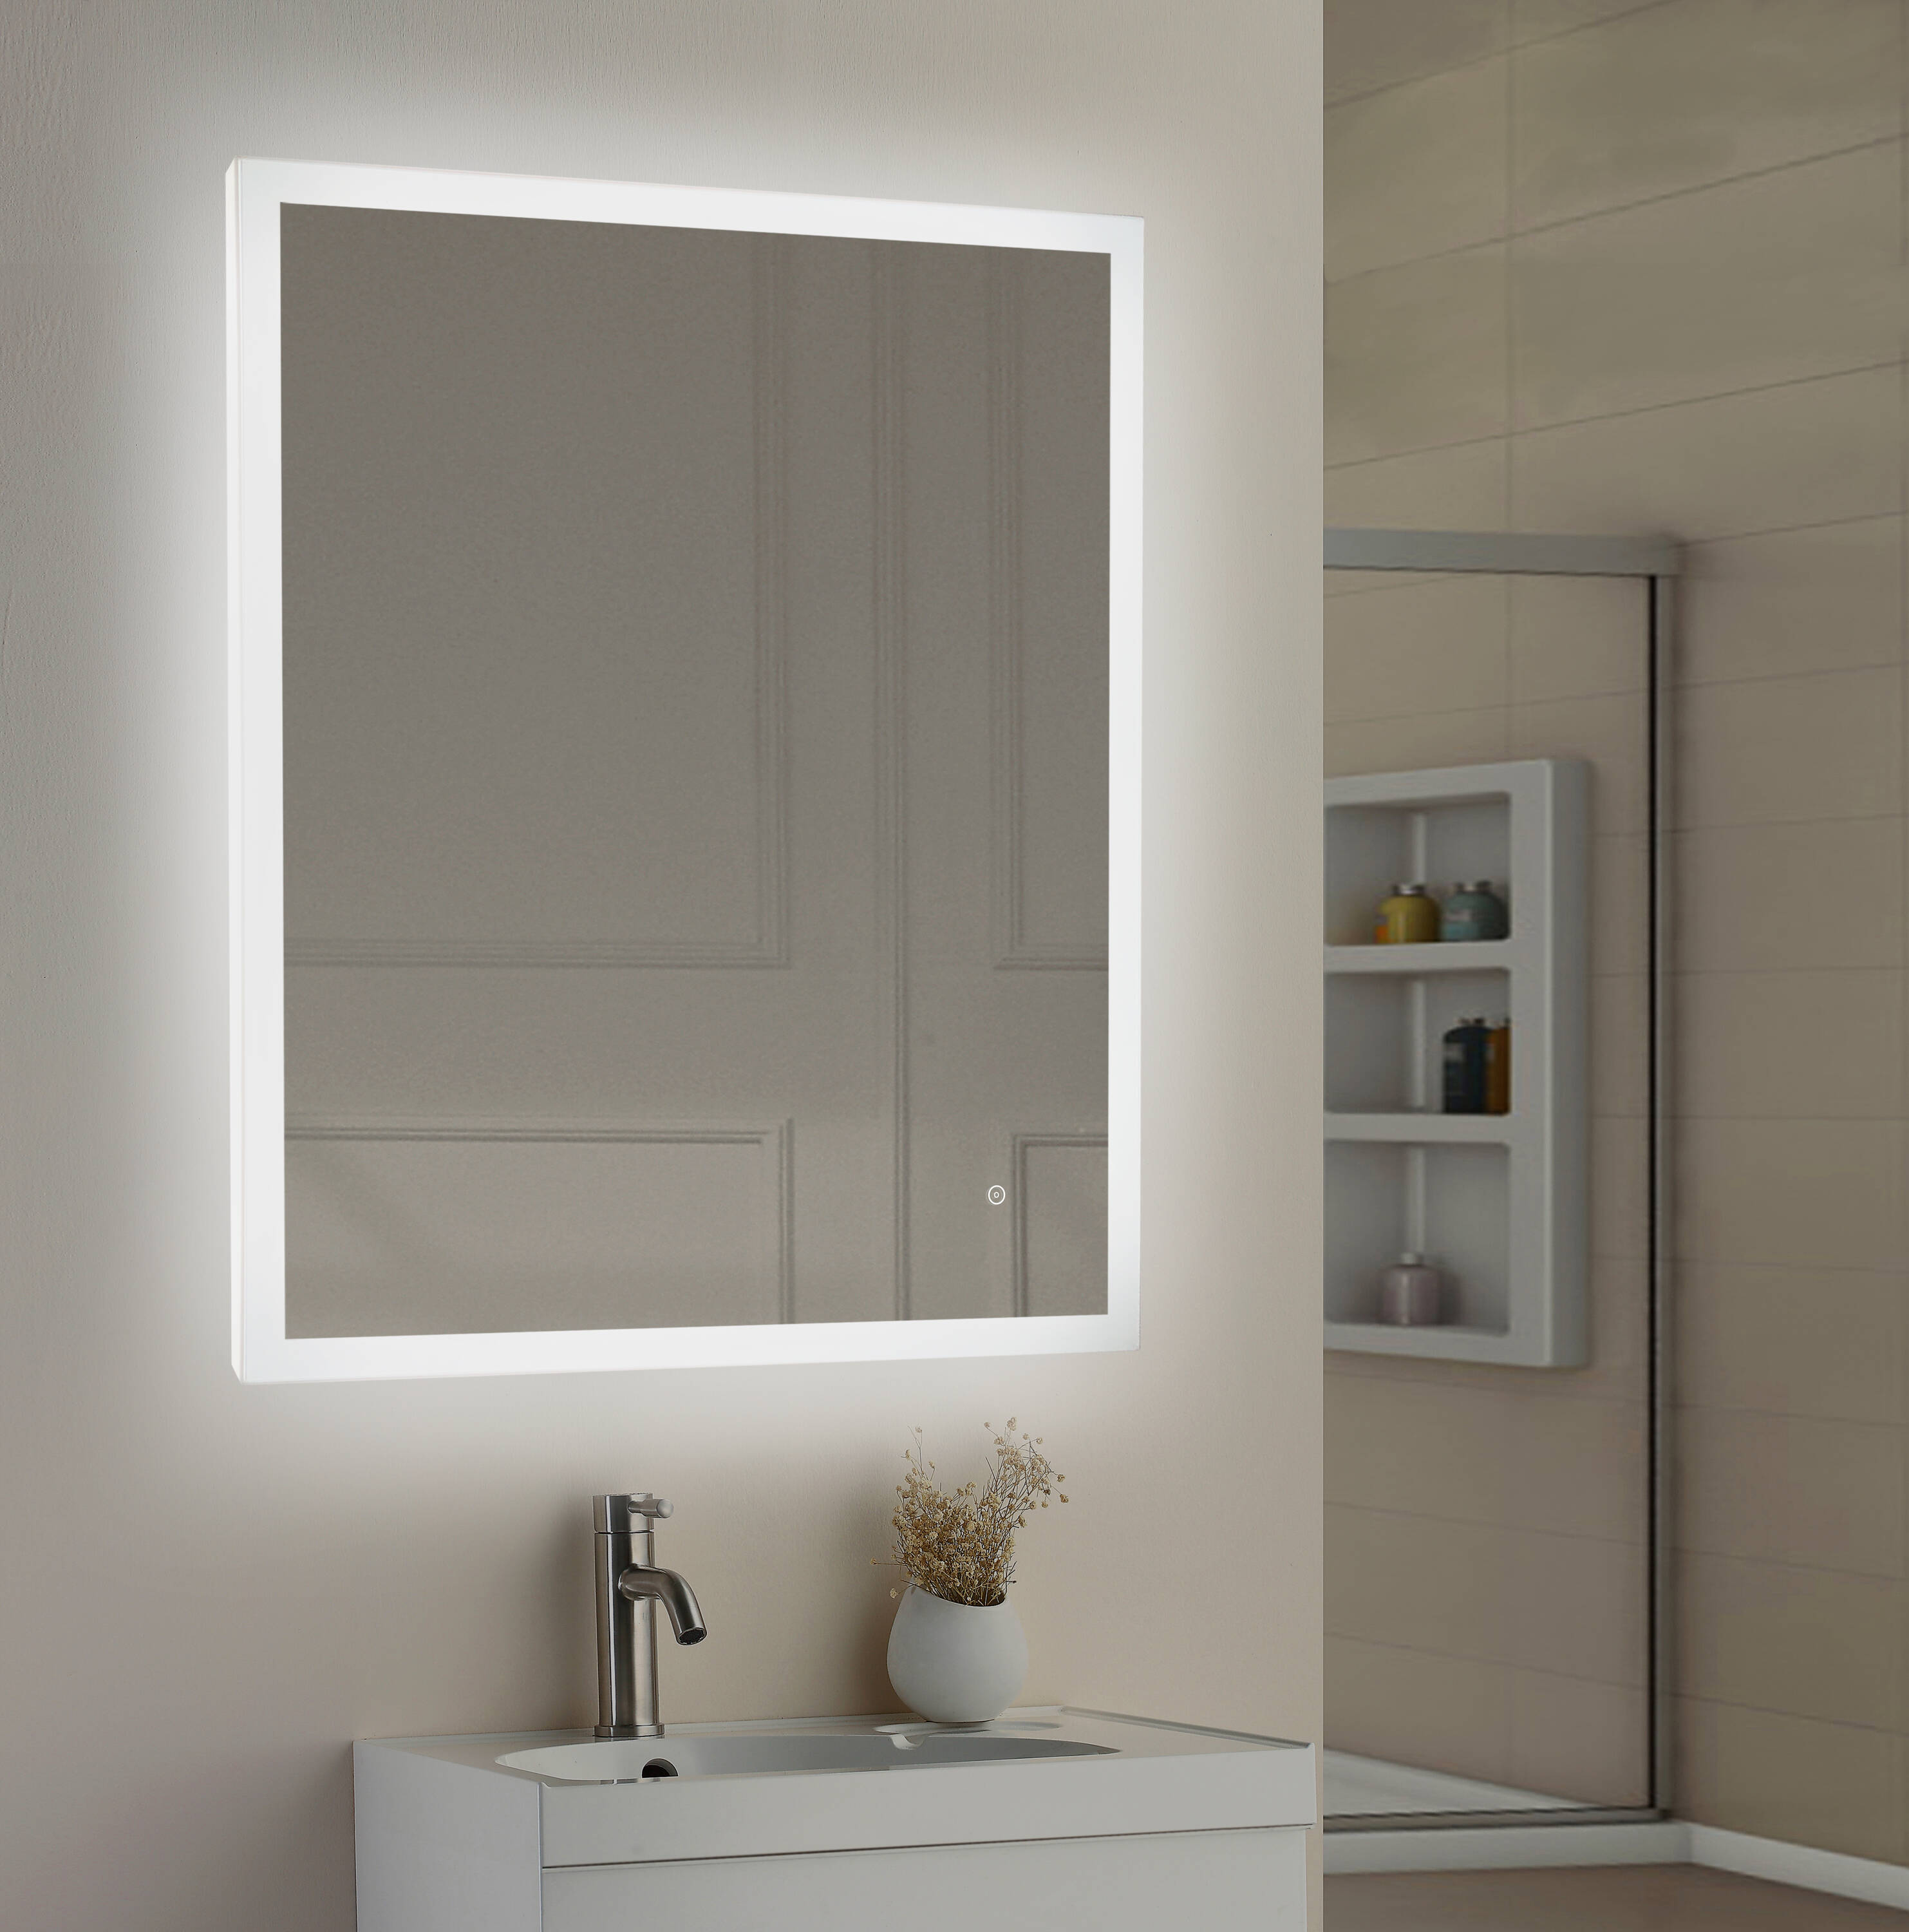 allen + roth 36-in x 42-in Dimmable Lighted LED Lit Mirror Fog Free  Frameless Bathroom Vanity Mirror at